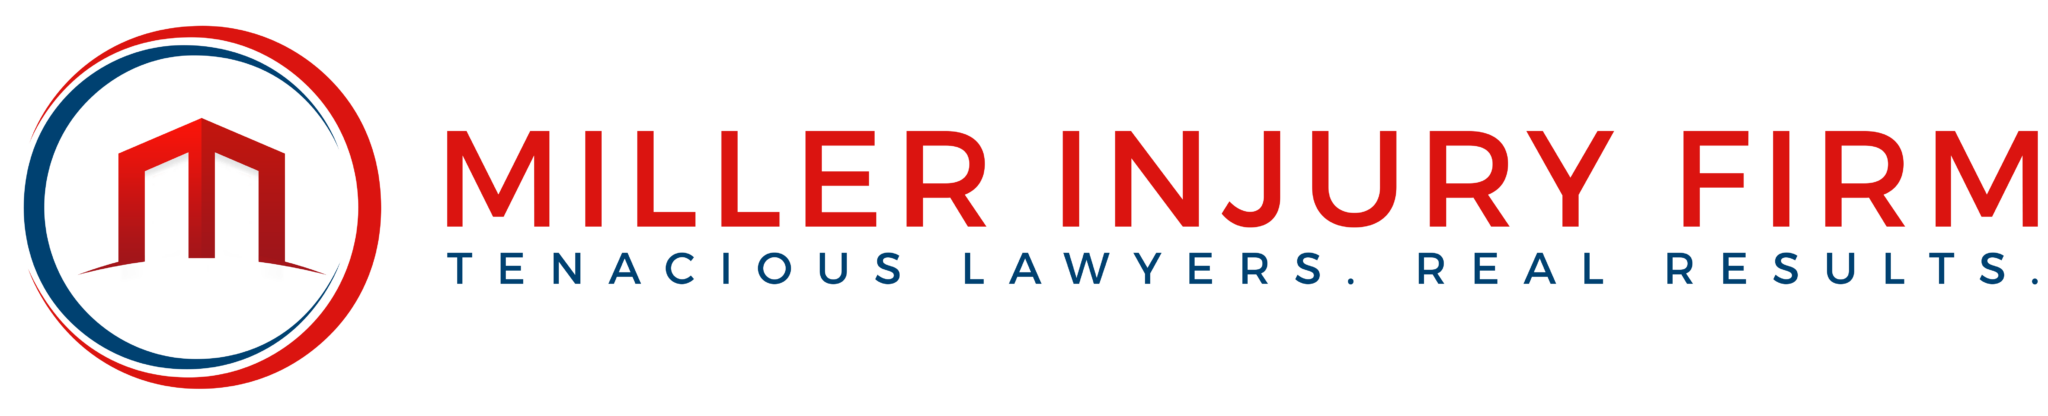 Miller Injury Firm - Tenacious Lawyers. Real Results.